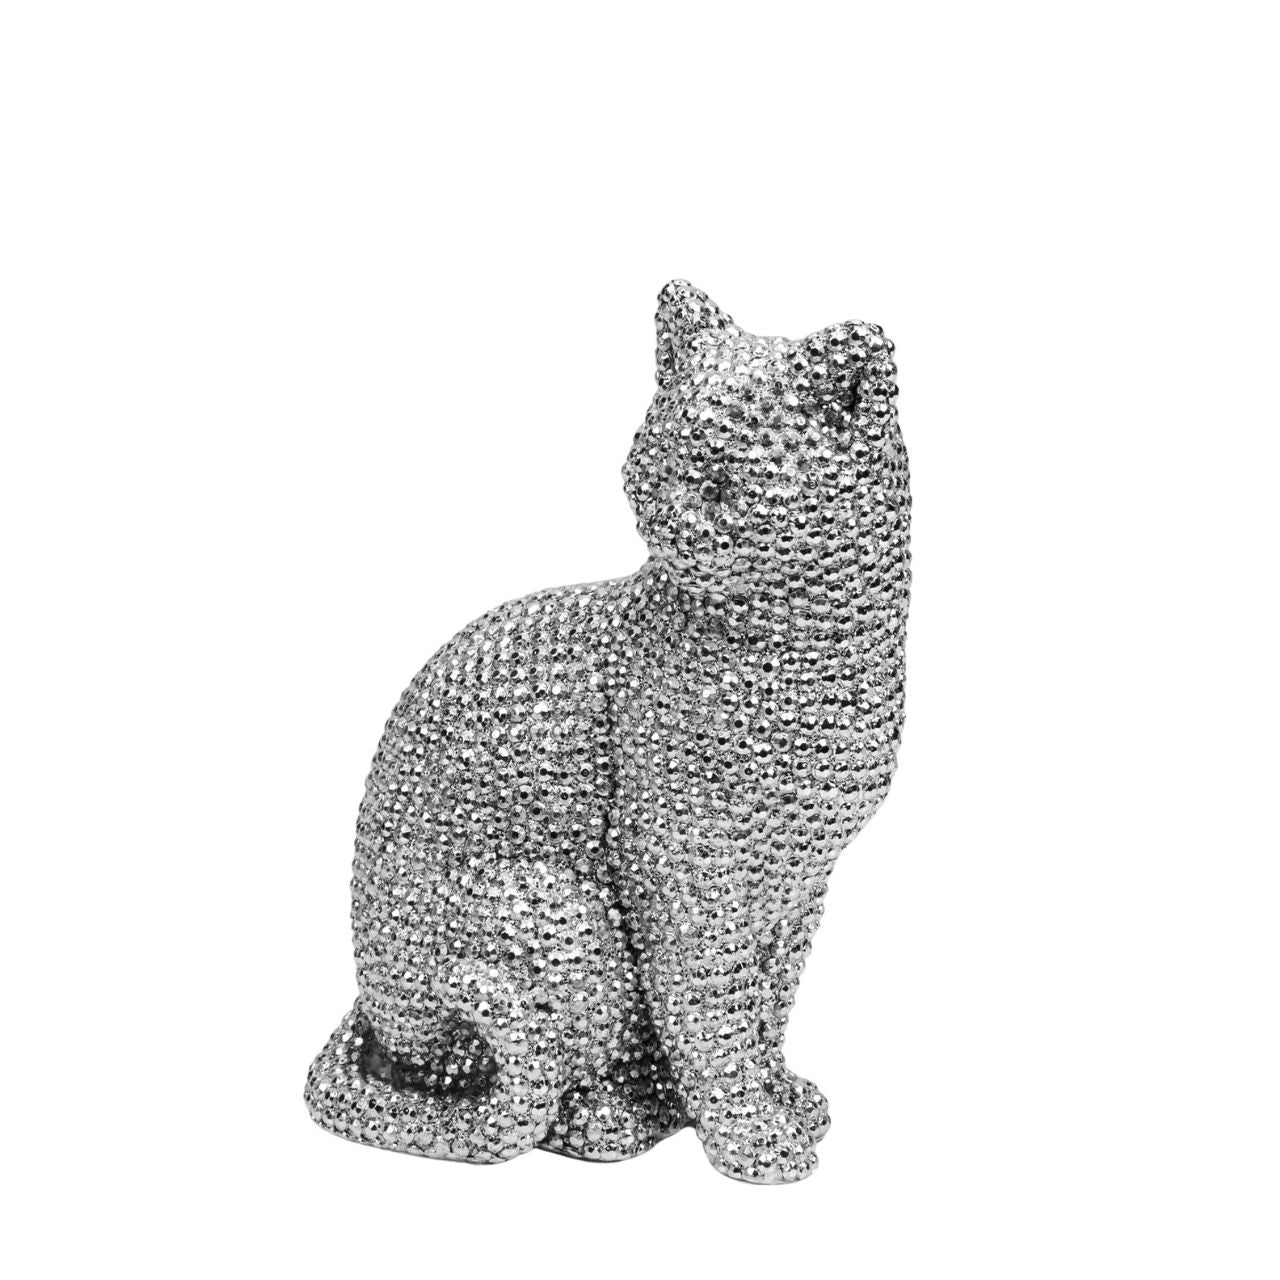 Bring some extra special sparkle to any space with this twinkling diamante effect sitting cat sculpture. From the HESTIA Silver Luxe collection - unparalleled glamour, style and elegance in contemporary home and gift.